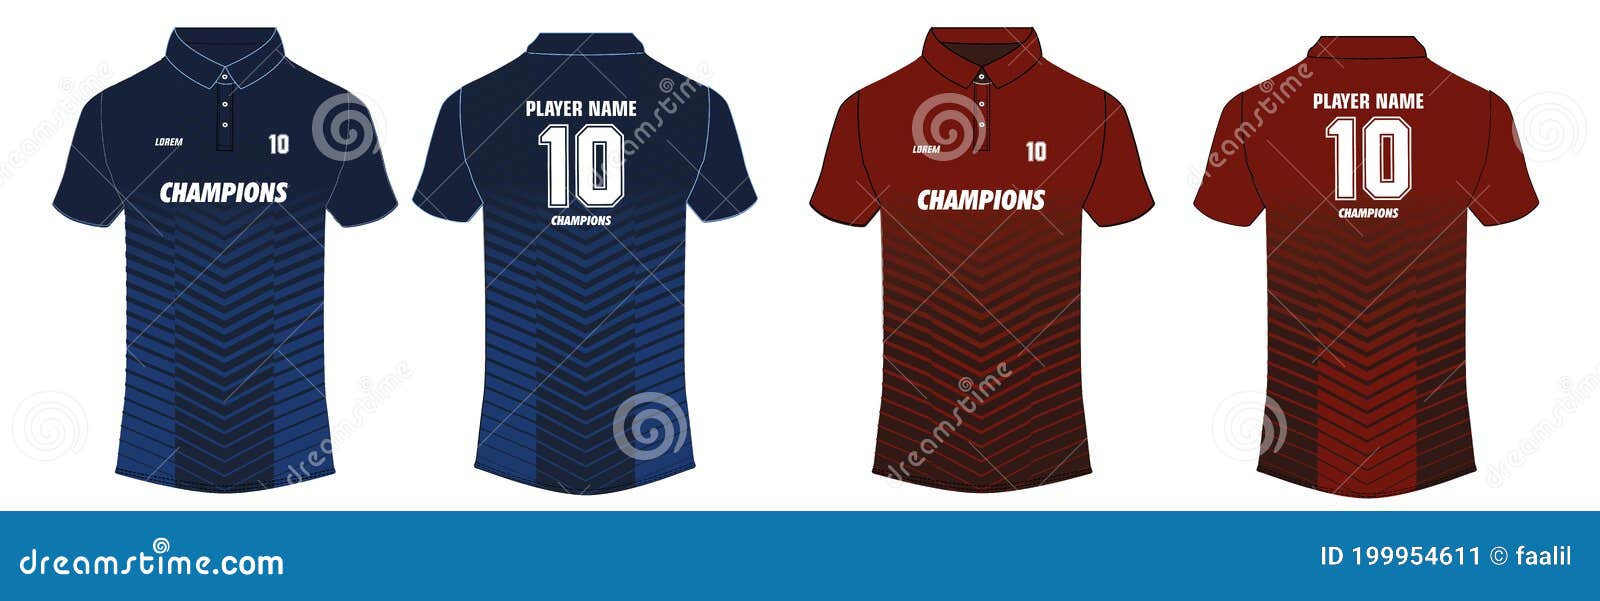 Download Sports Polo T-shirt Jersey Design Template, Mock Up Uniform Kit With Front And Back View In Two ...